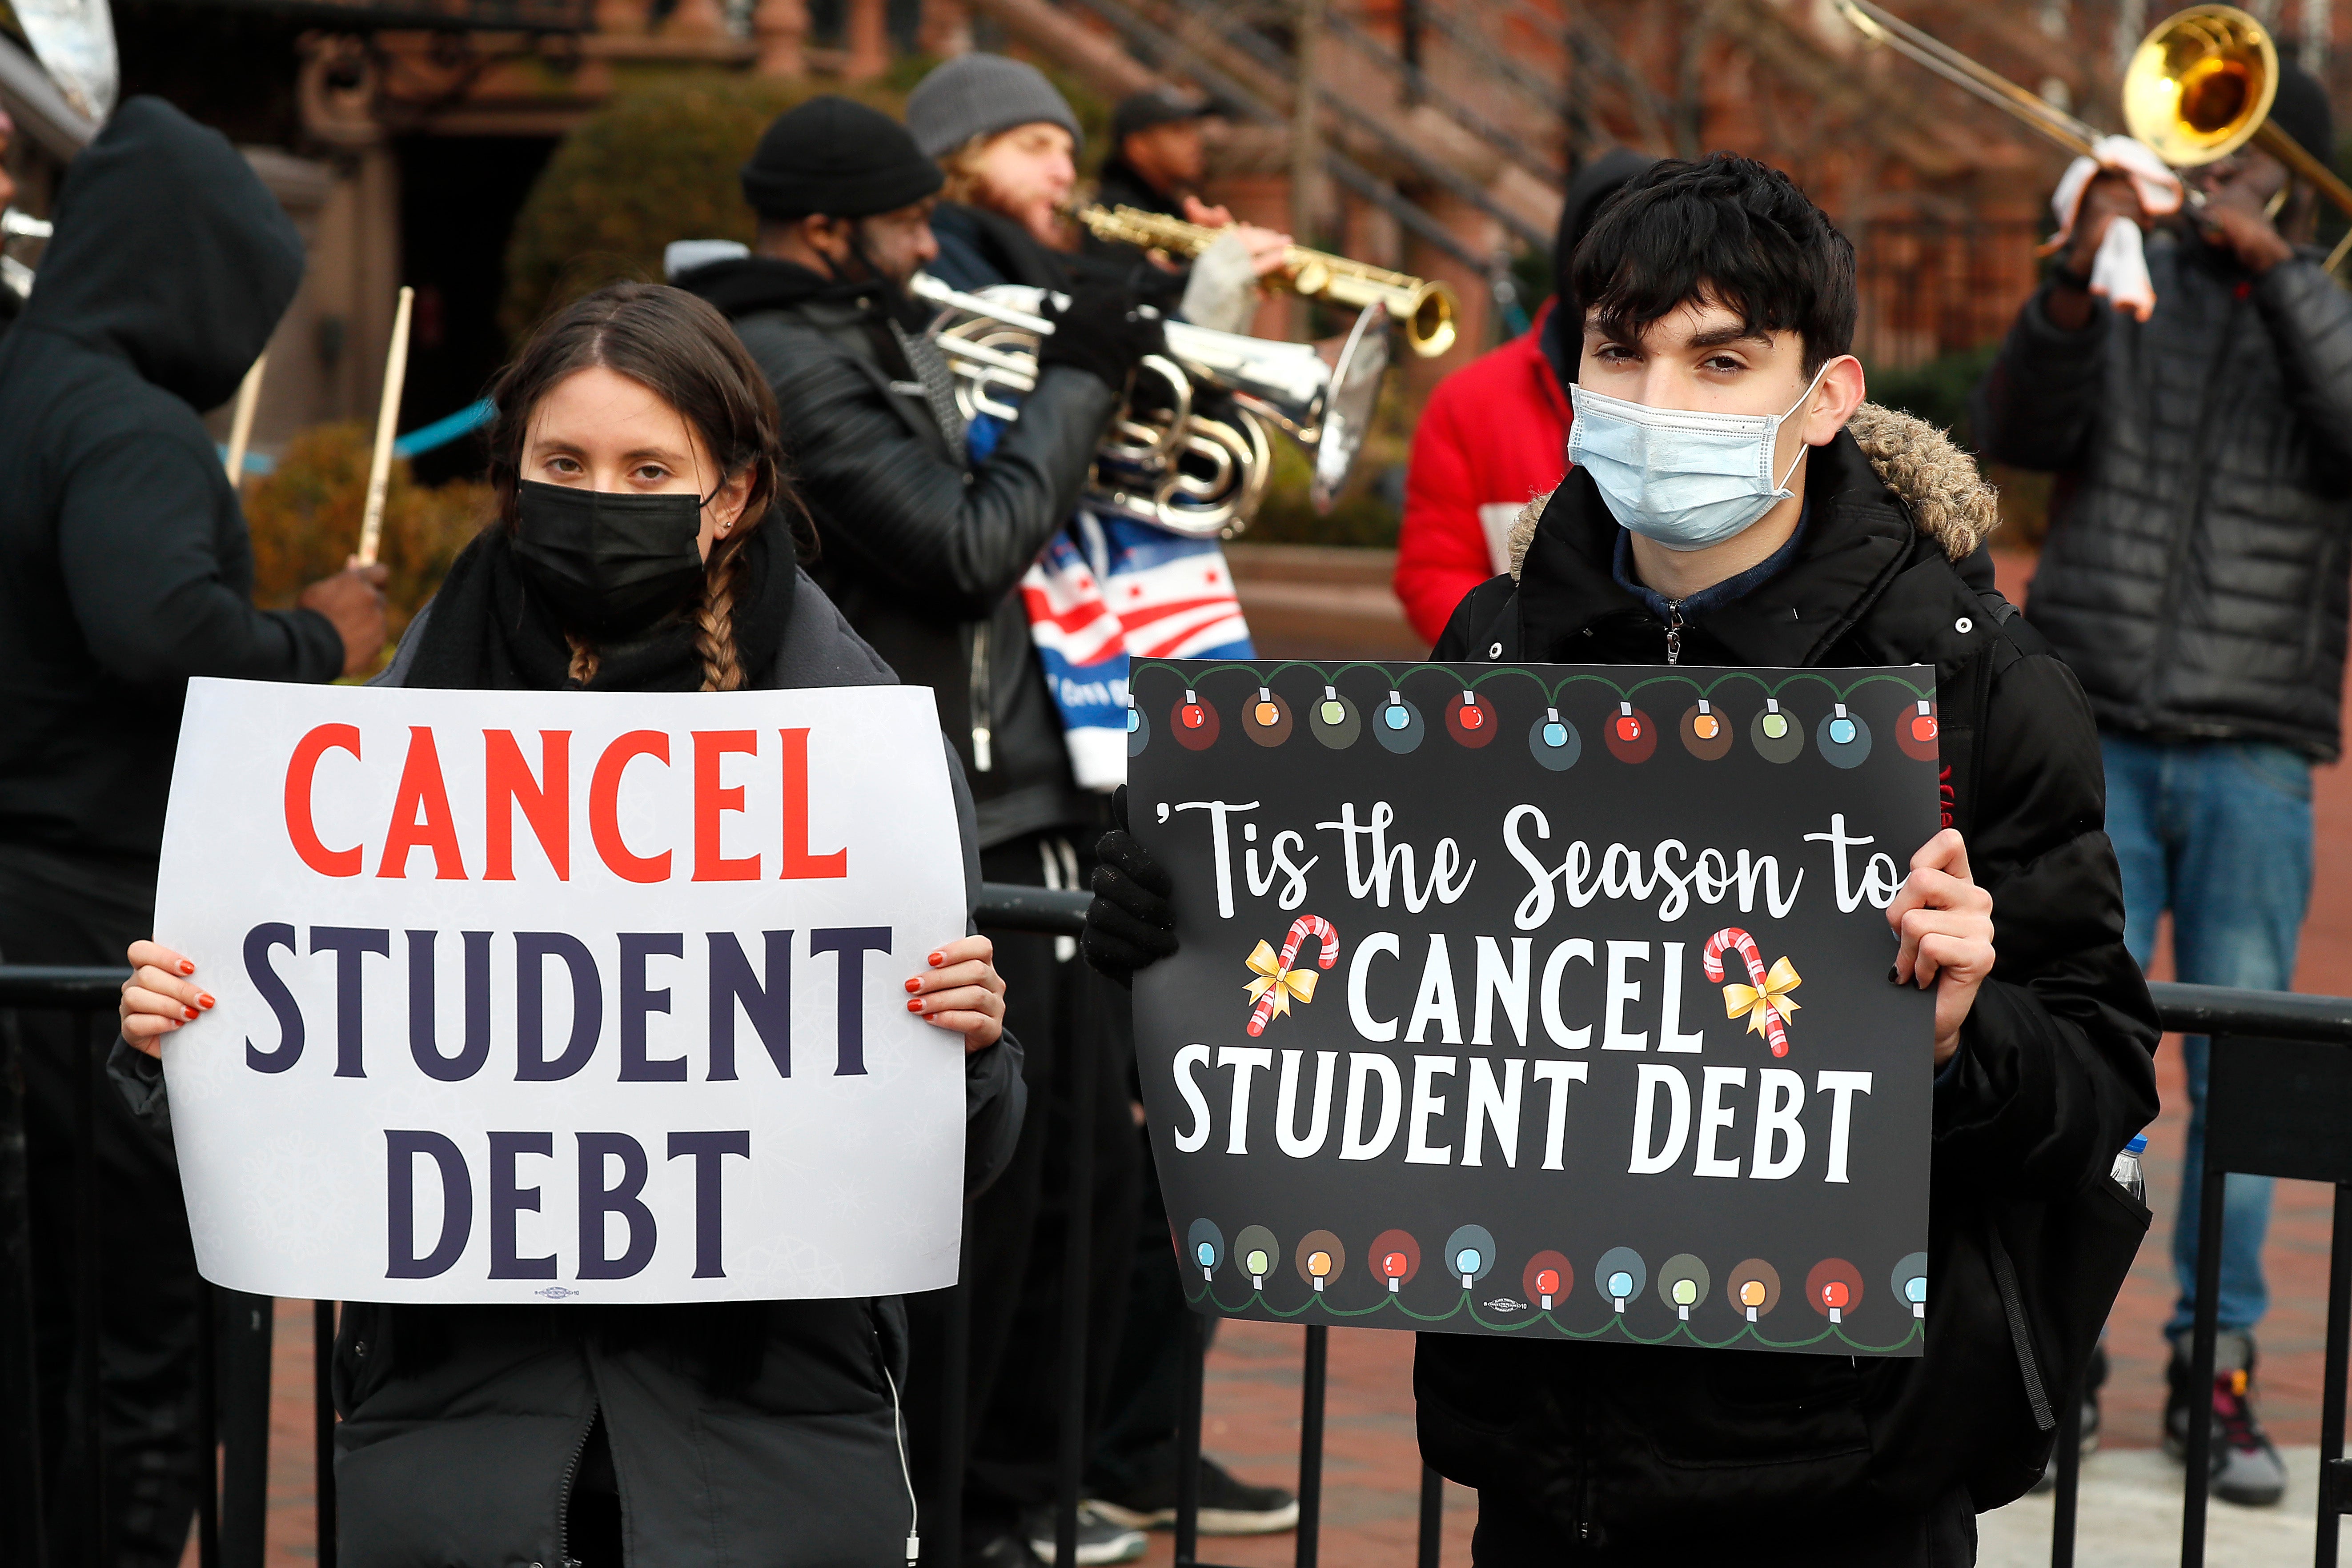 Advocates for student loan debt cancellation rallied outside the White House on 15 December. Joe Biden has extended a pause on repayments until May.